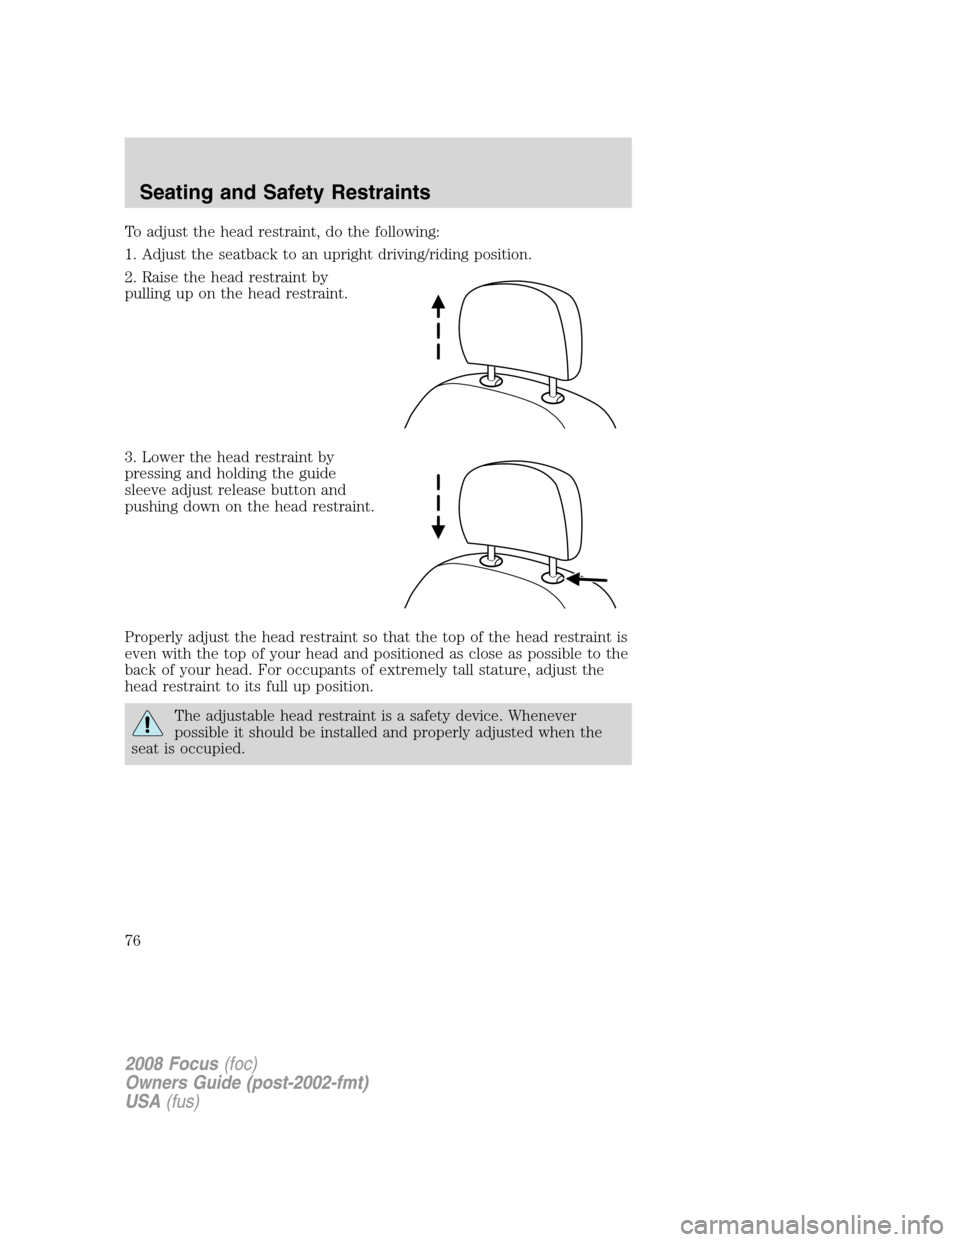 FORD FOCUS 2008 2.G Manual PDF To adjust the head restraint, do the following:
1. Adjust the seatback to an upright driving/riding position.
2. Raise the head restraint by
pulling up on the head restraint.
3. Lower the head restrai